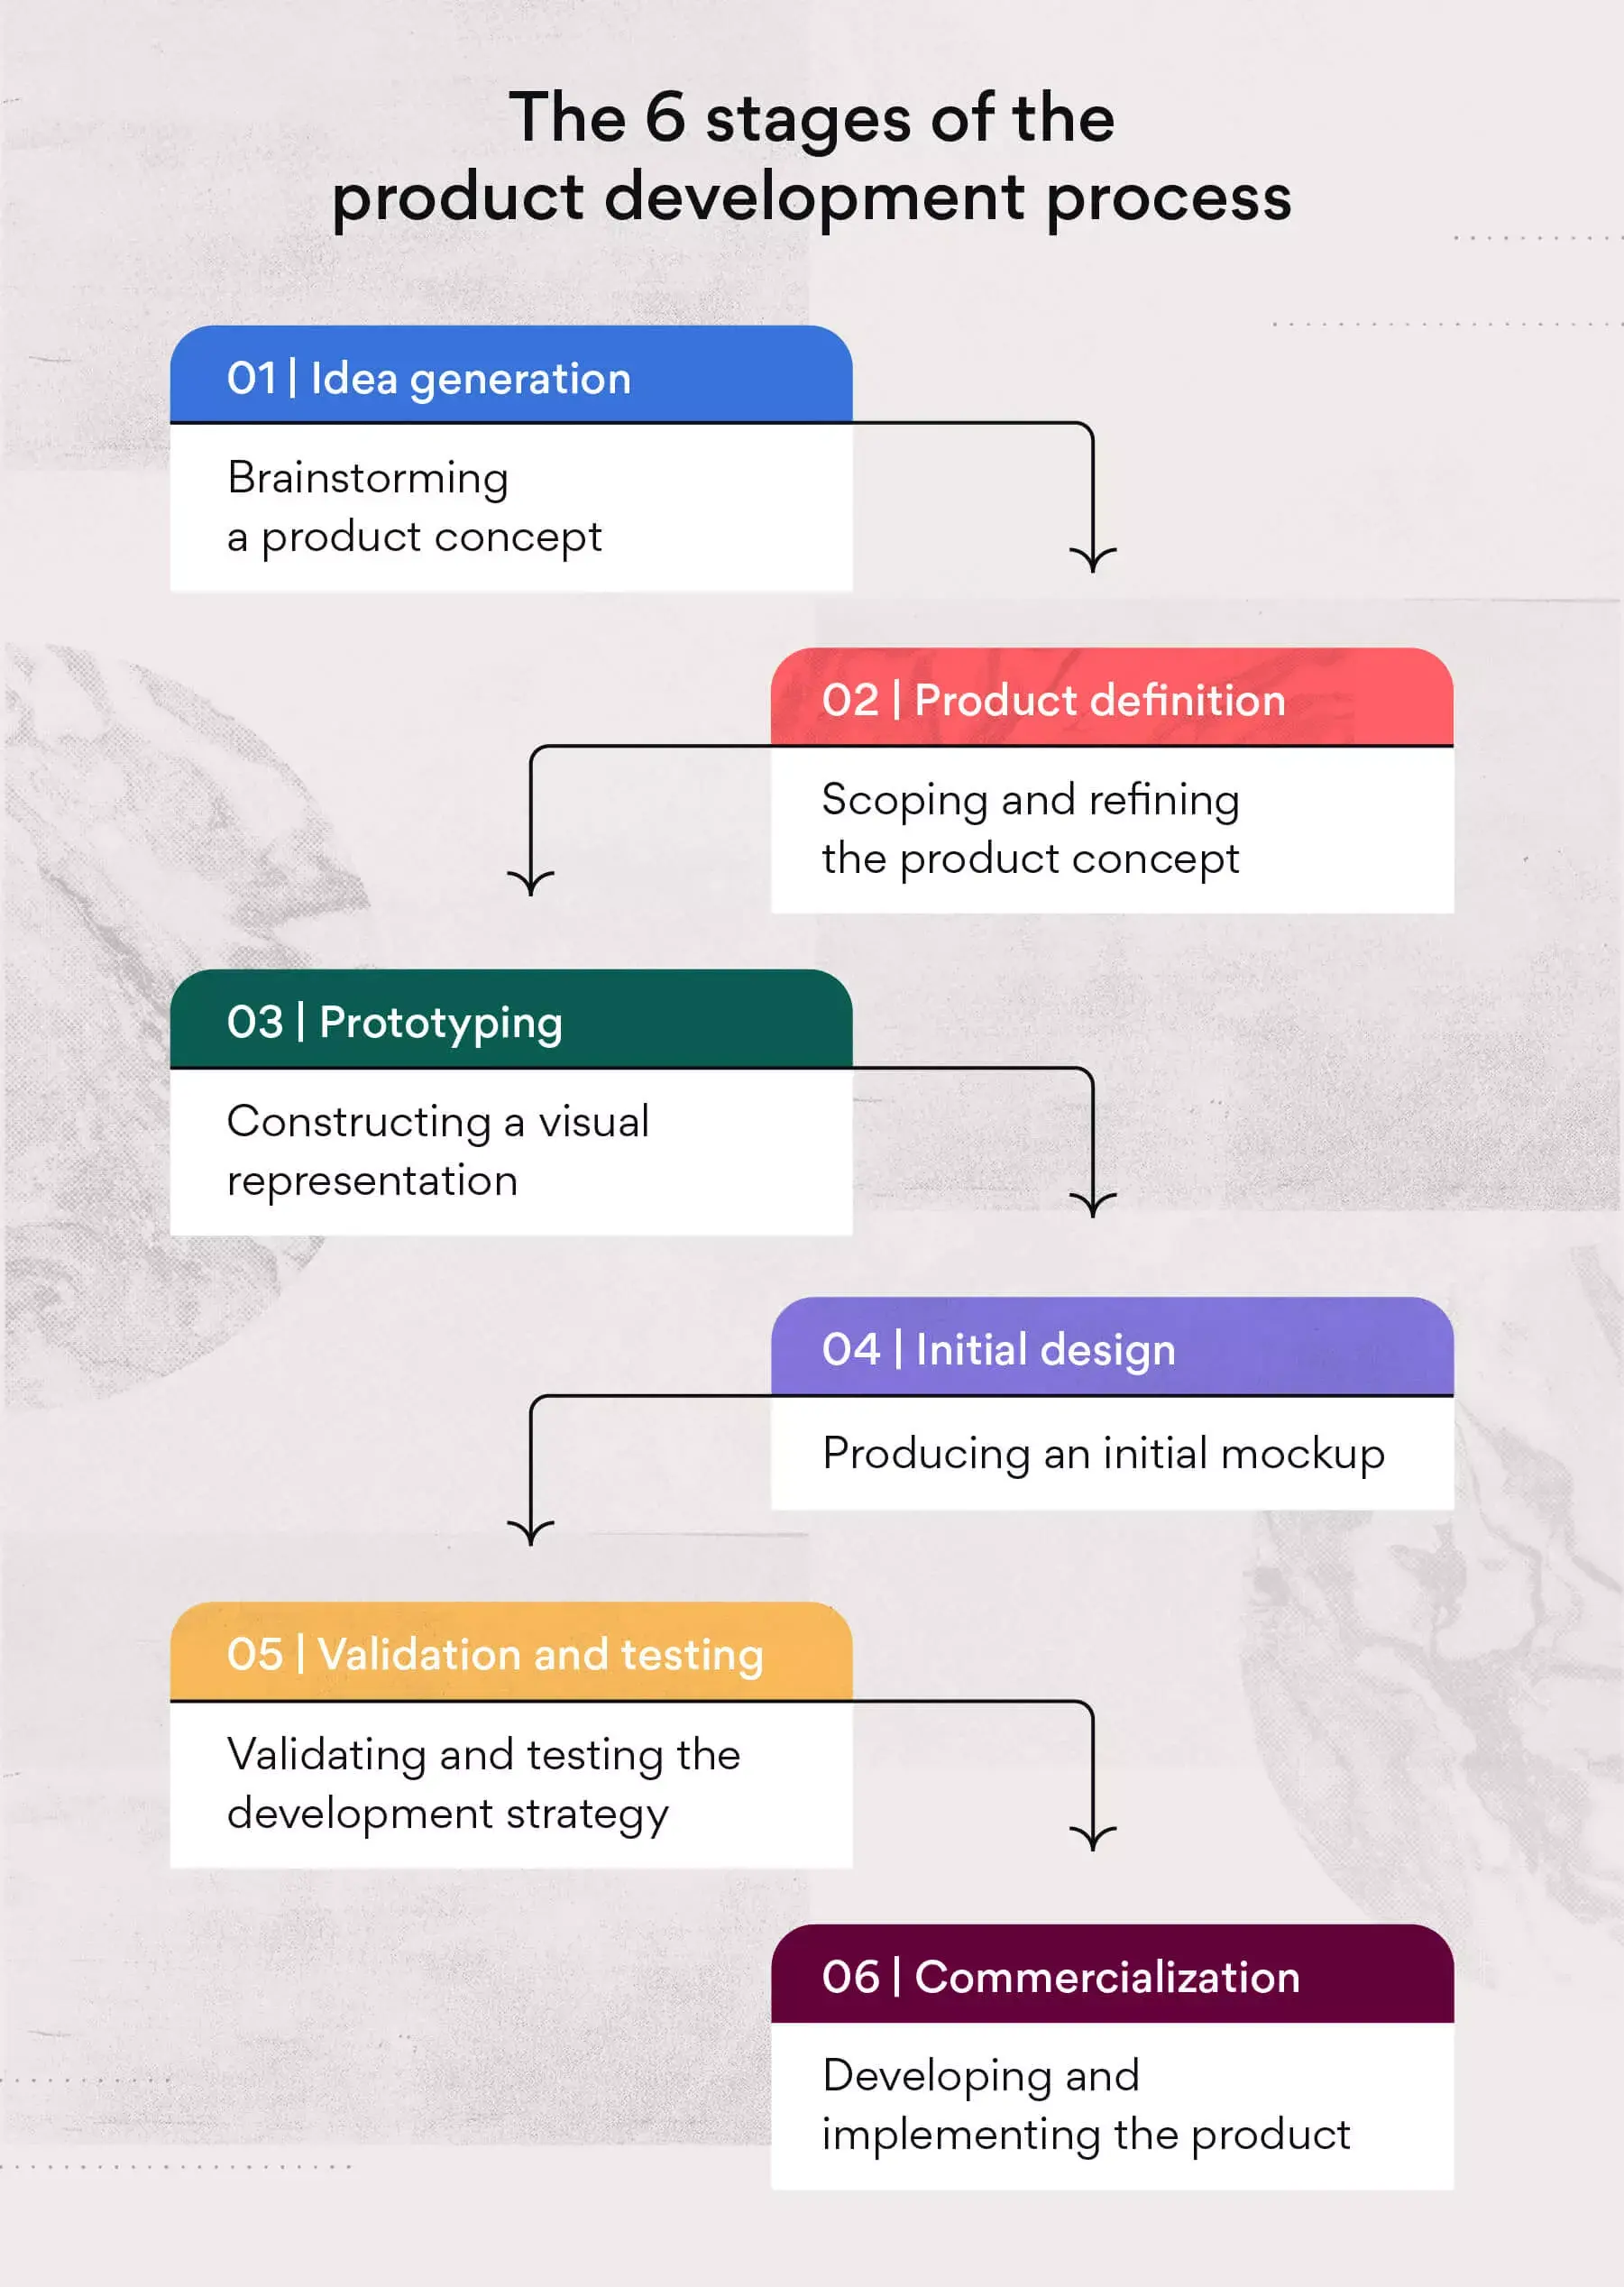 The six stages of the product development process